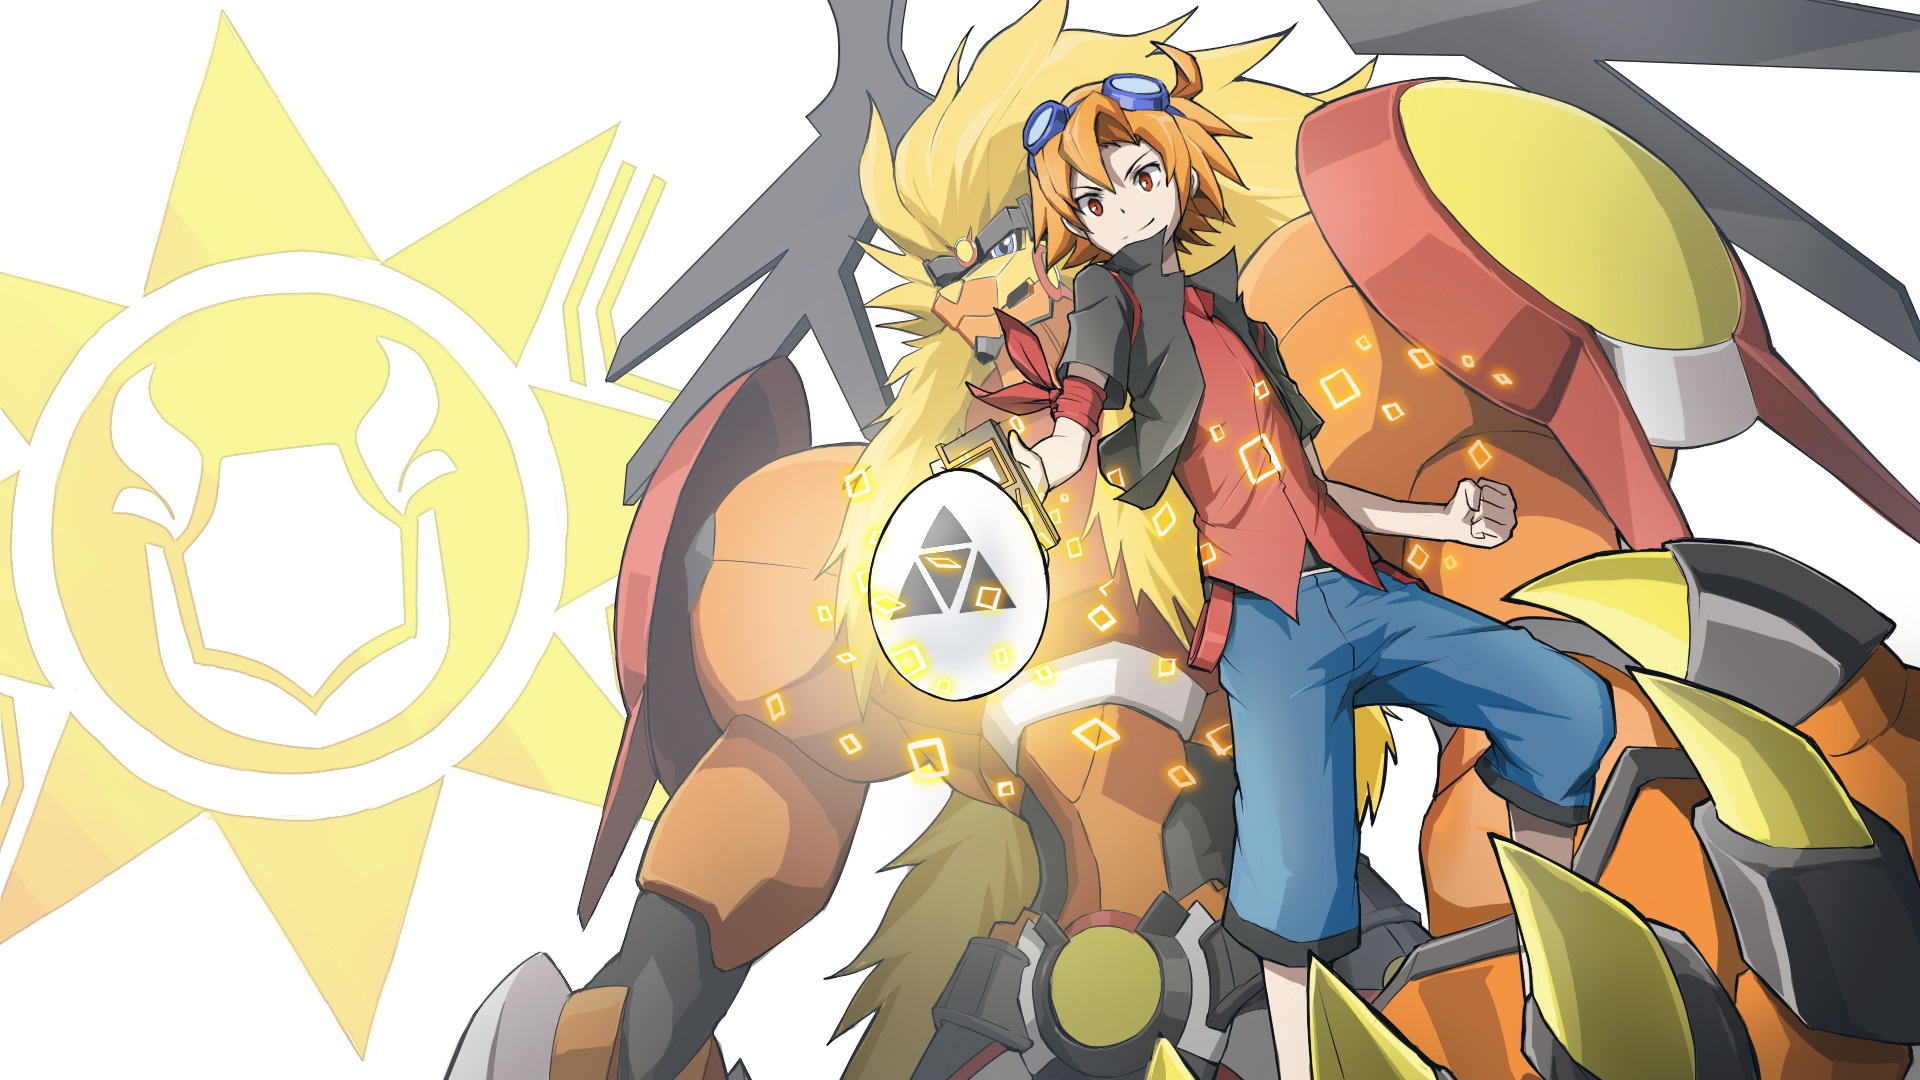 digimon dawn rom download nds